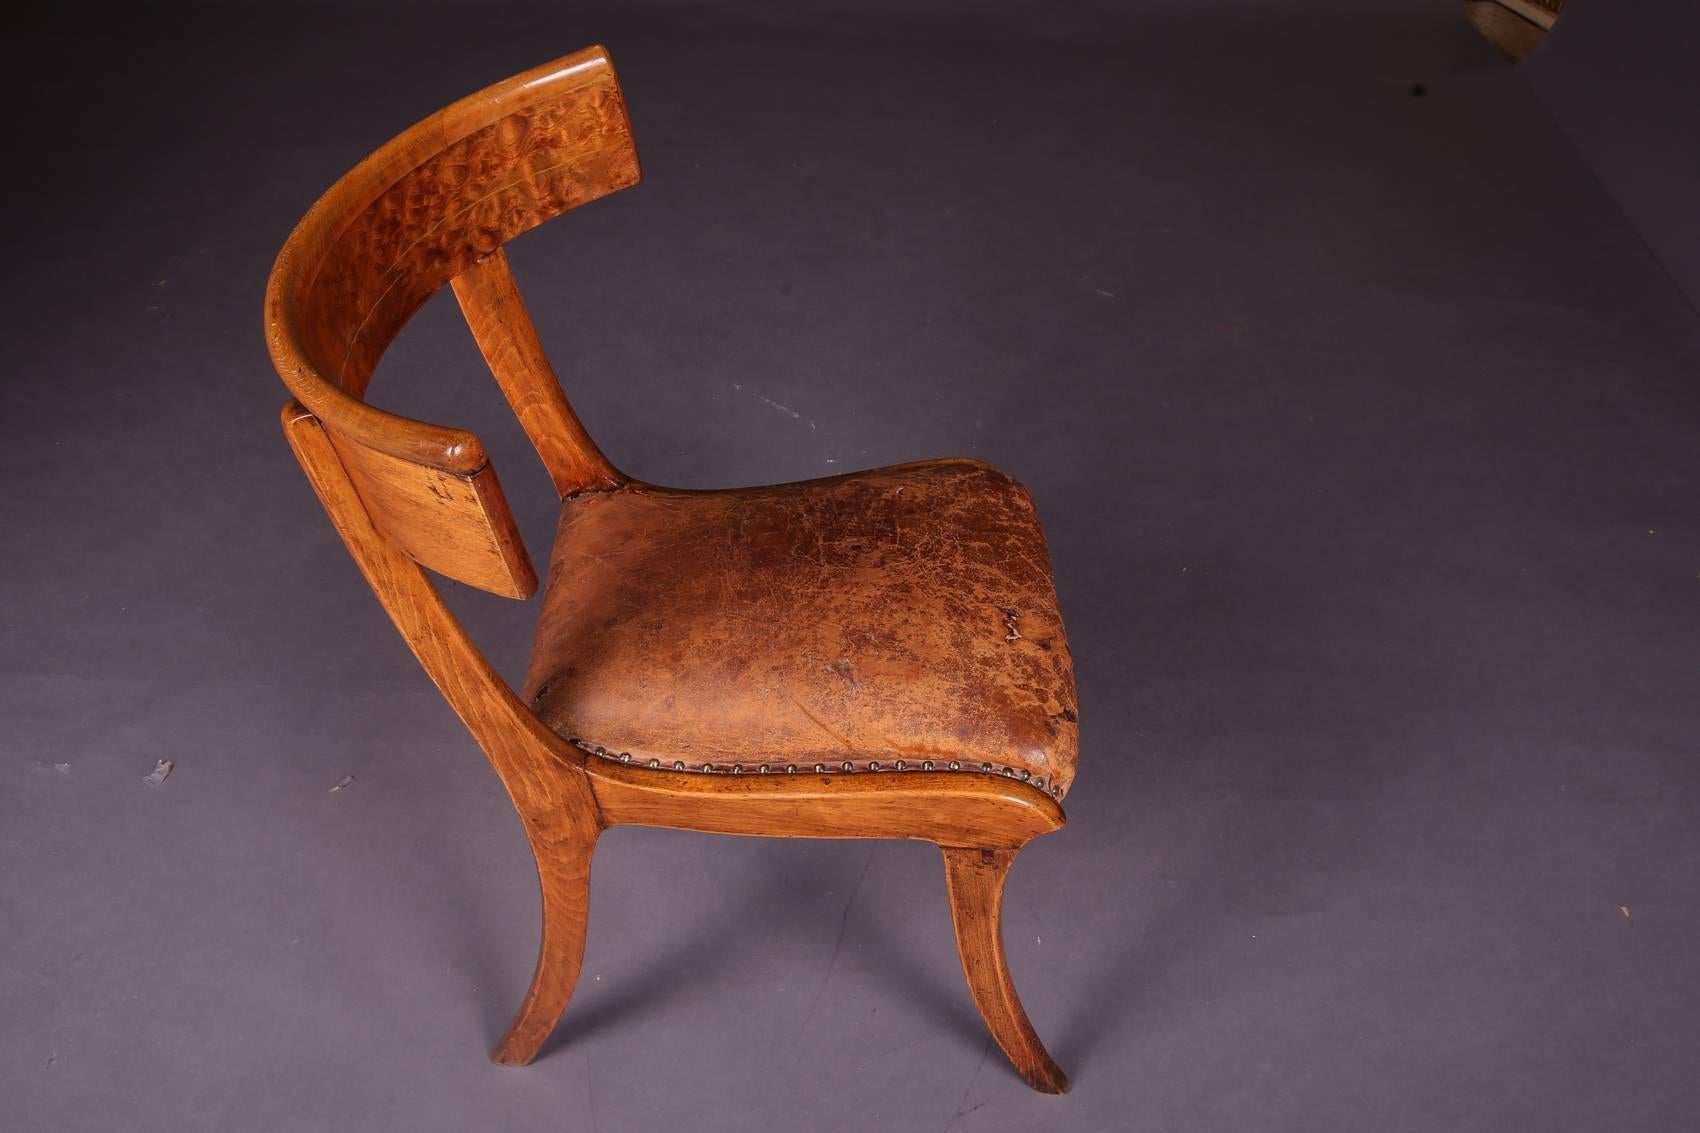 Chair of the Greek antique. 
Solid wood. The striking shape with the wide-legged saber legs and the encircling backrest board was rediscovered in classicism, circa 1800. In this specimen, however, the pure basic form of the Klismos still exists. It